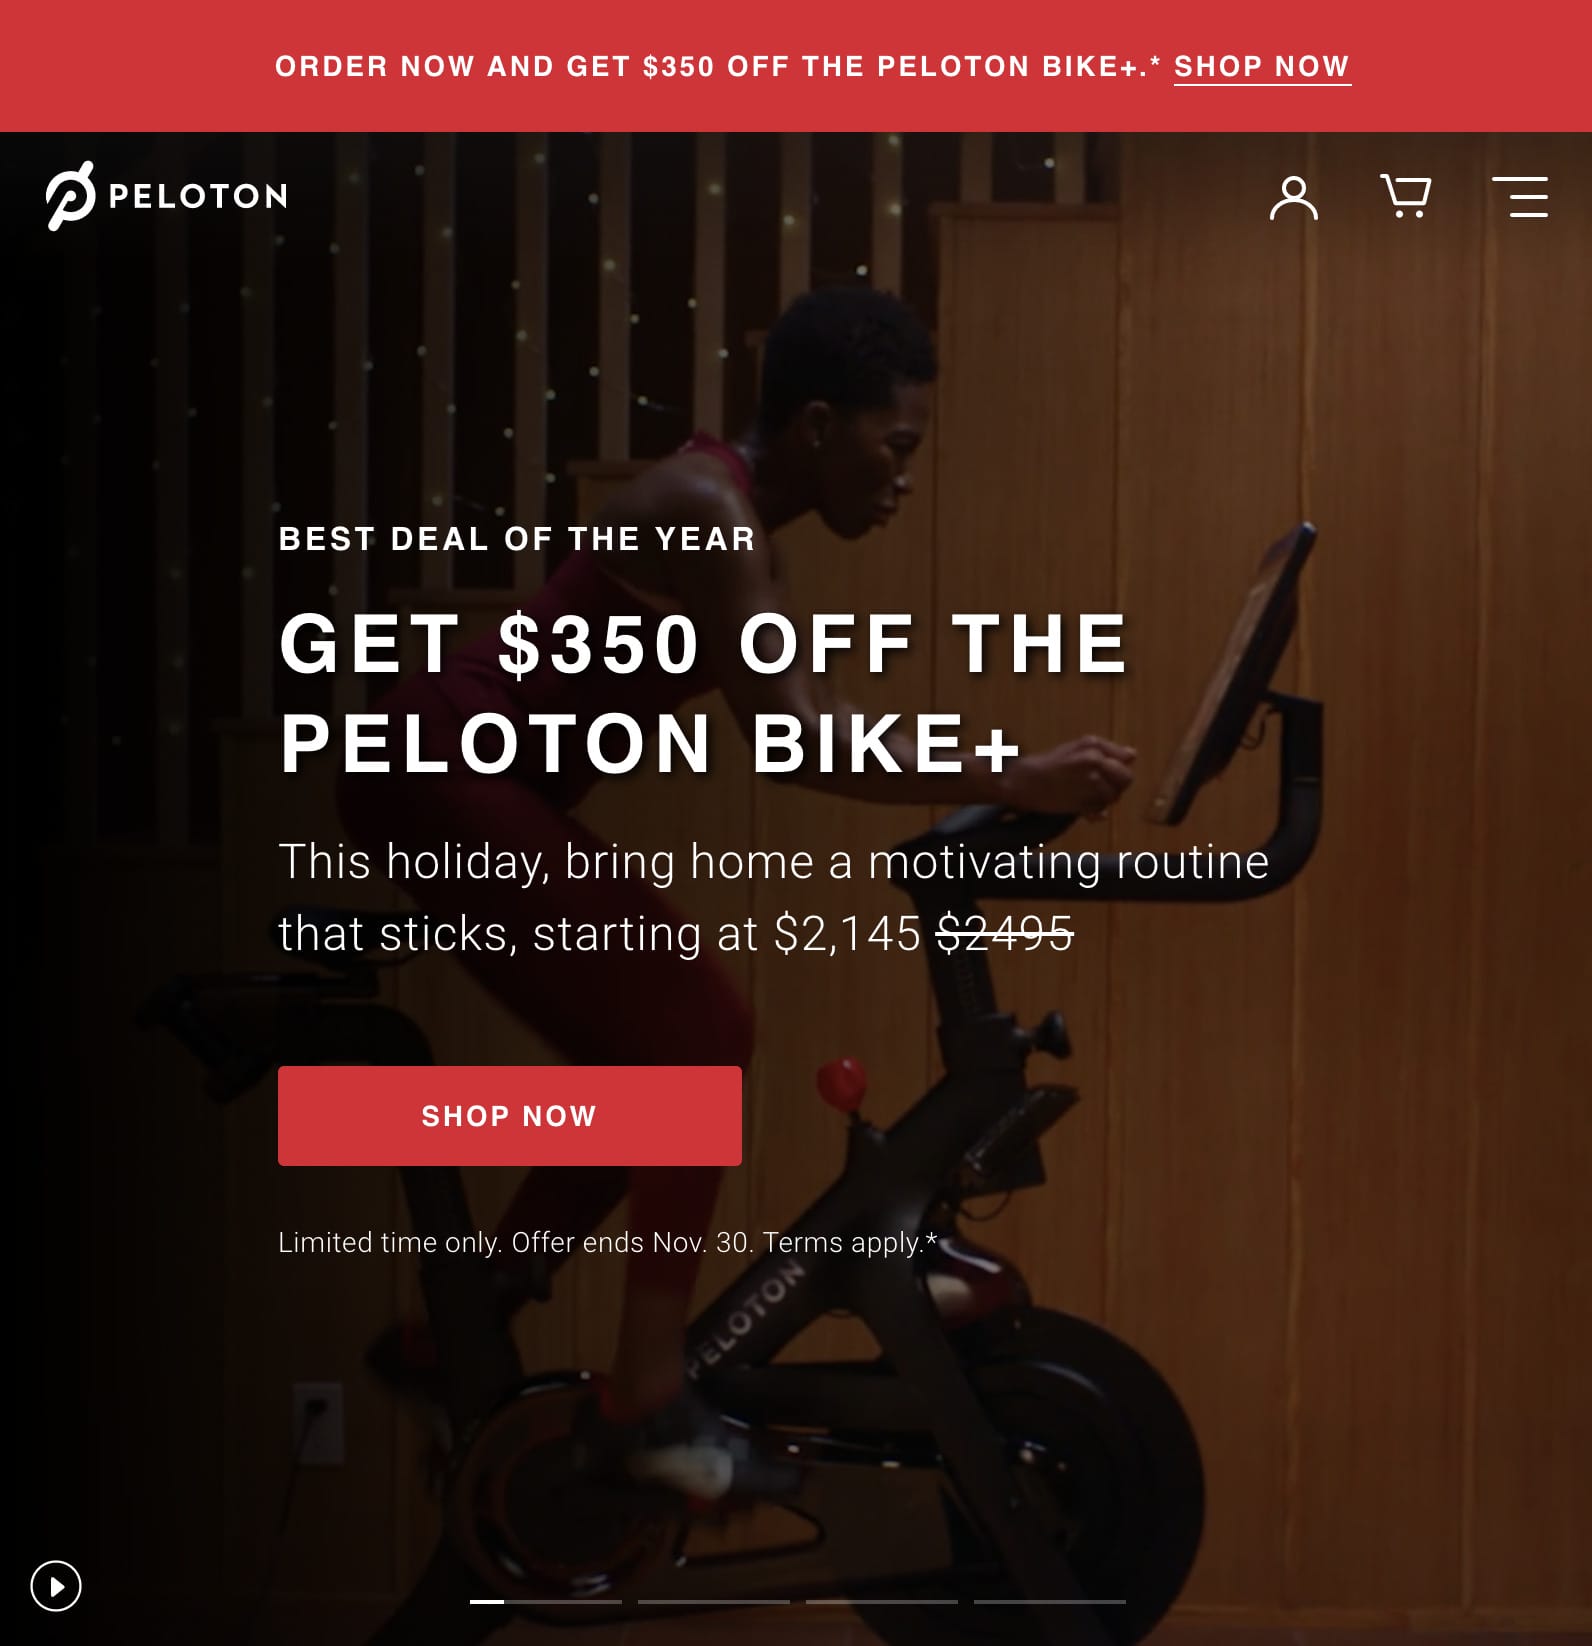 Complete list of 2021 Peloton Black Friday Deals and Discounts and Cyber Monday Sales on Peloton Bike, Bike+ and Peloton Tread and Peloton Apparel Deals now live in US and Canada too -